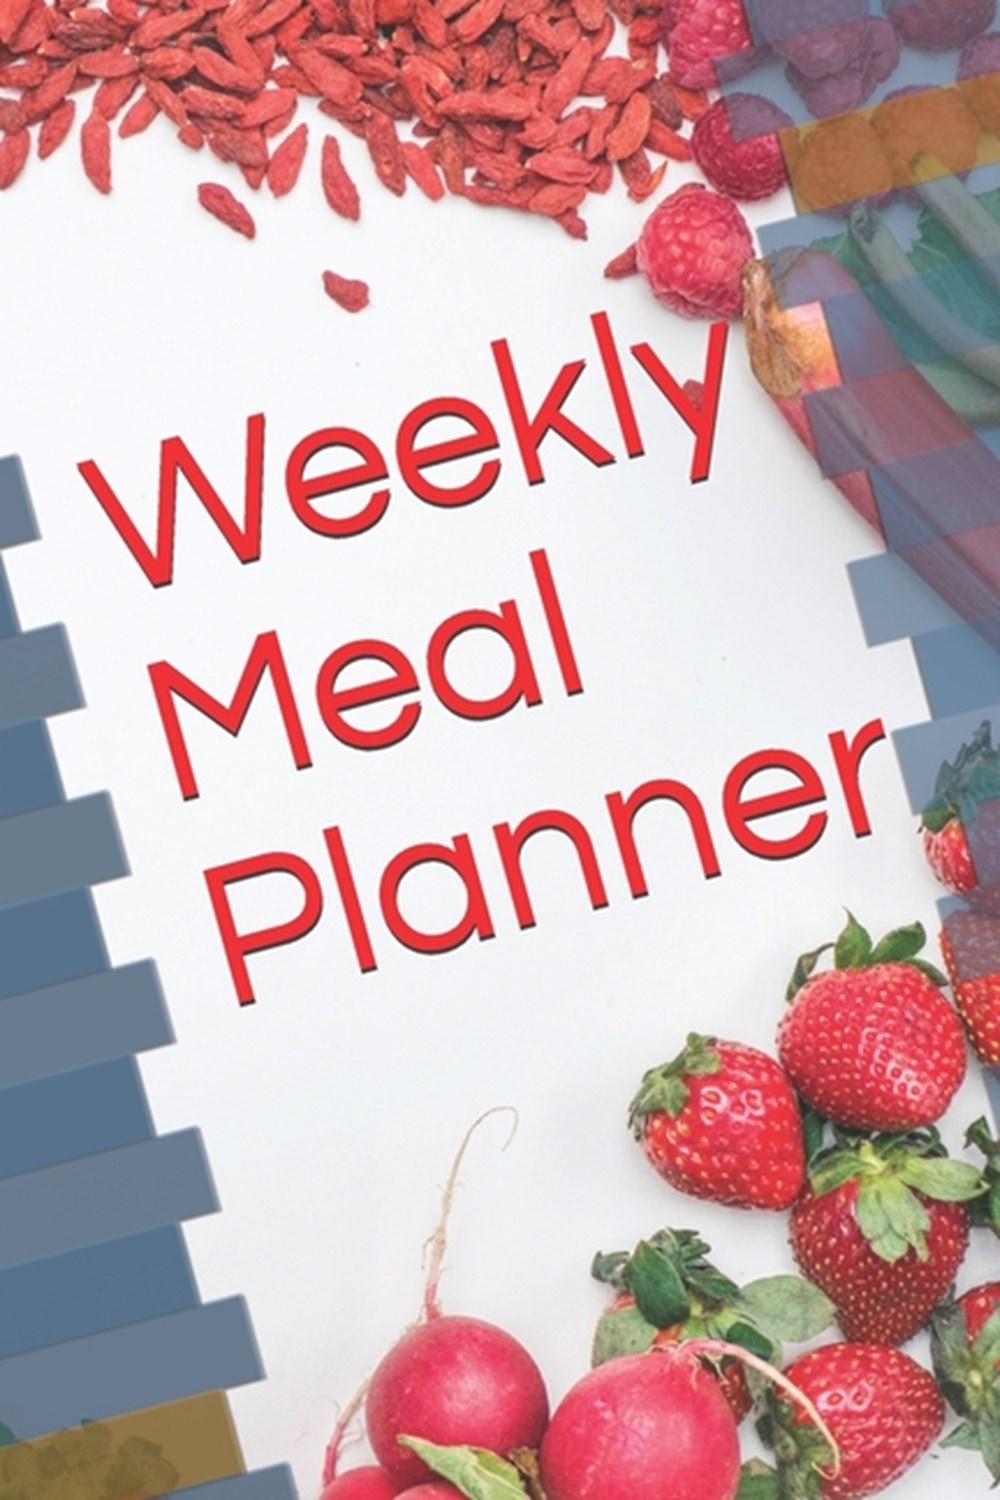 Weekly Meal Planner Grocery and Meal Planner